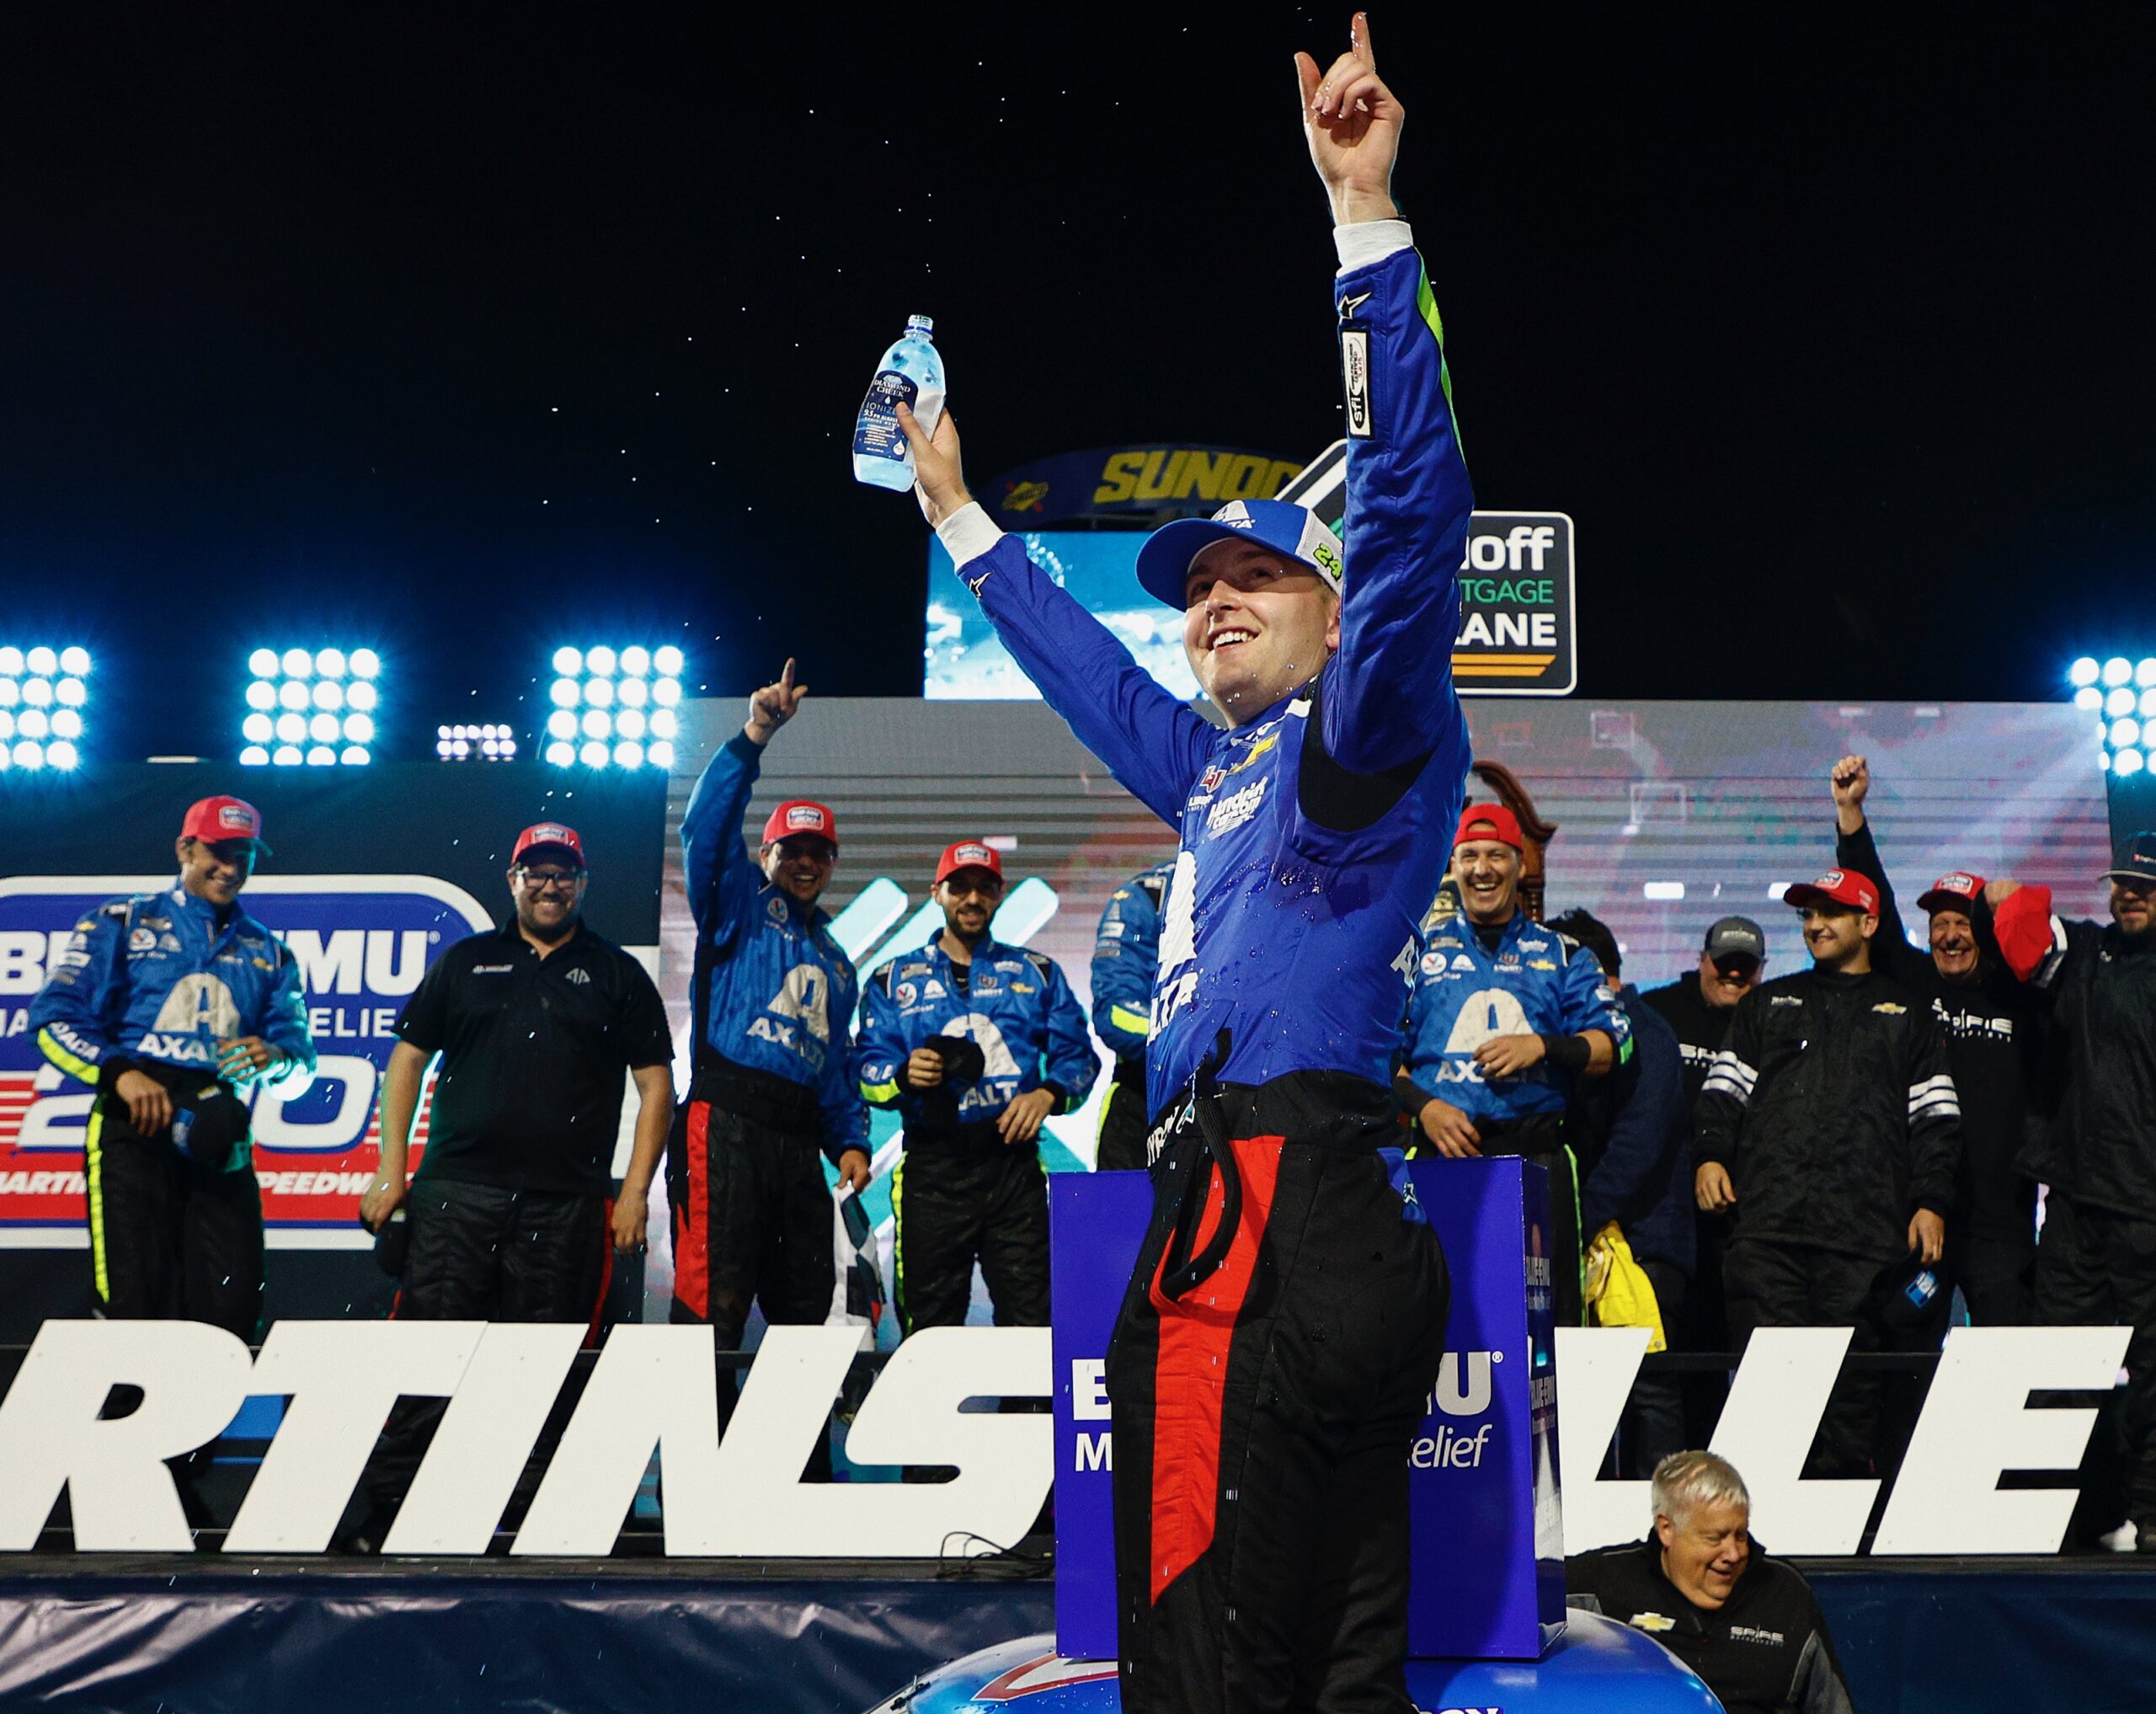 Byron scores a dominant victory in Truck return at Martinsville